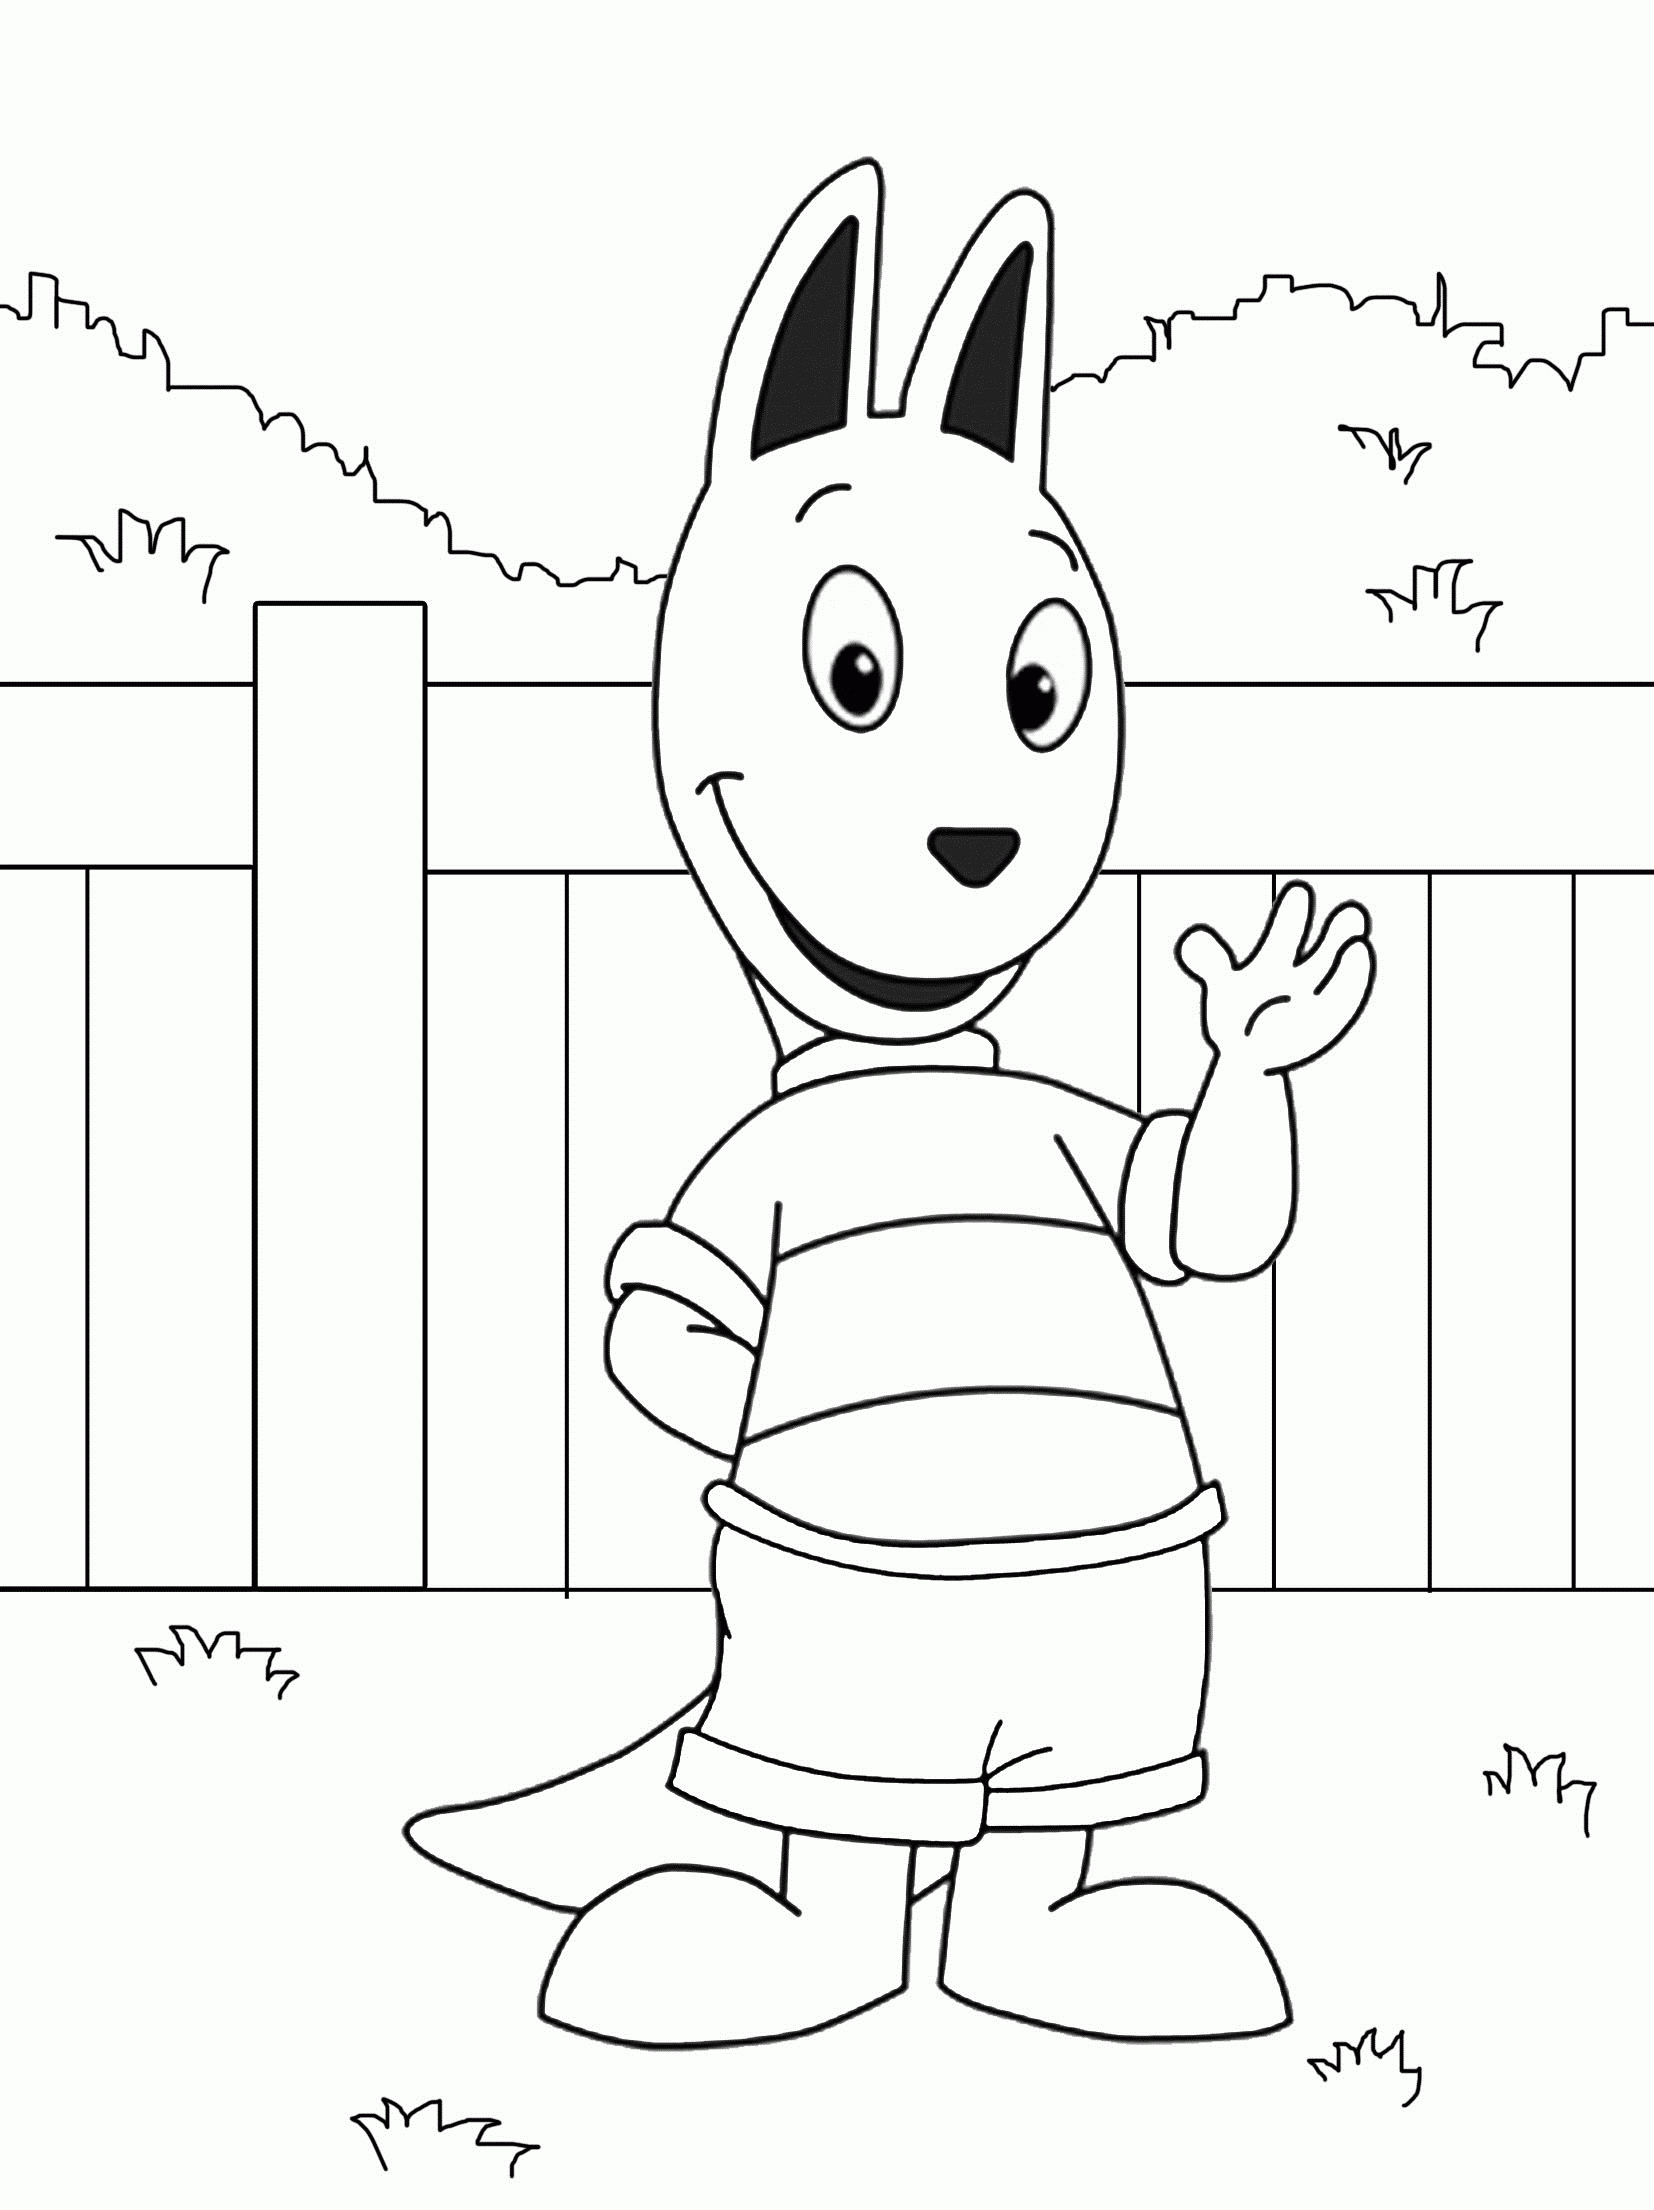 Printable Backyardigans Coloring Pages | Coloring Me